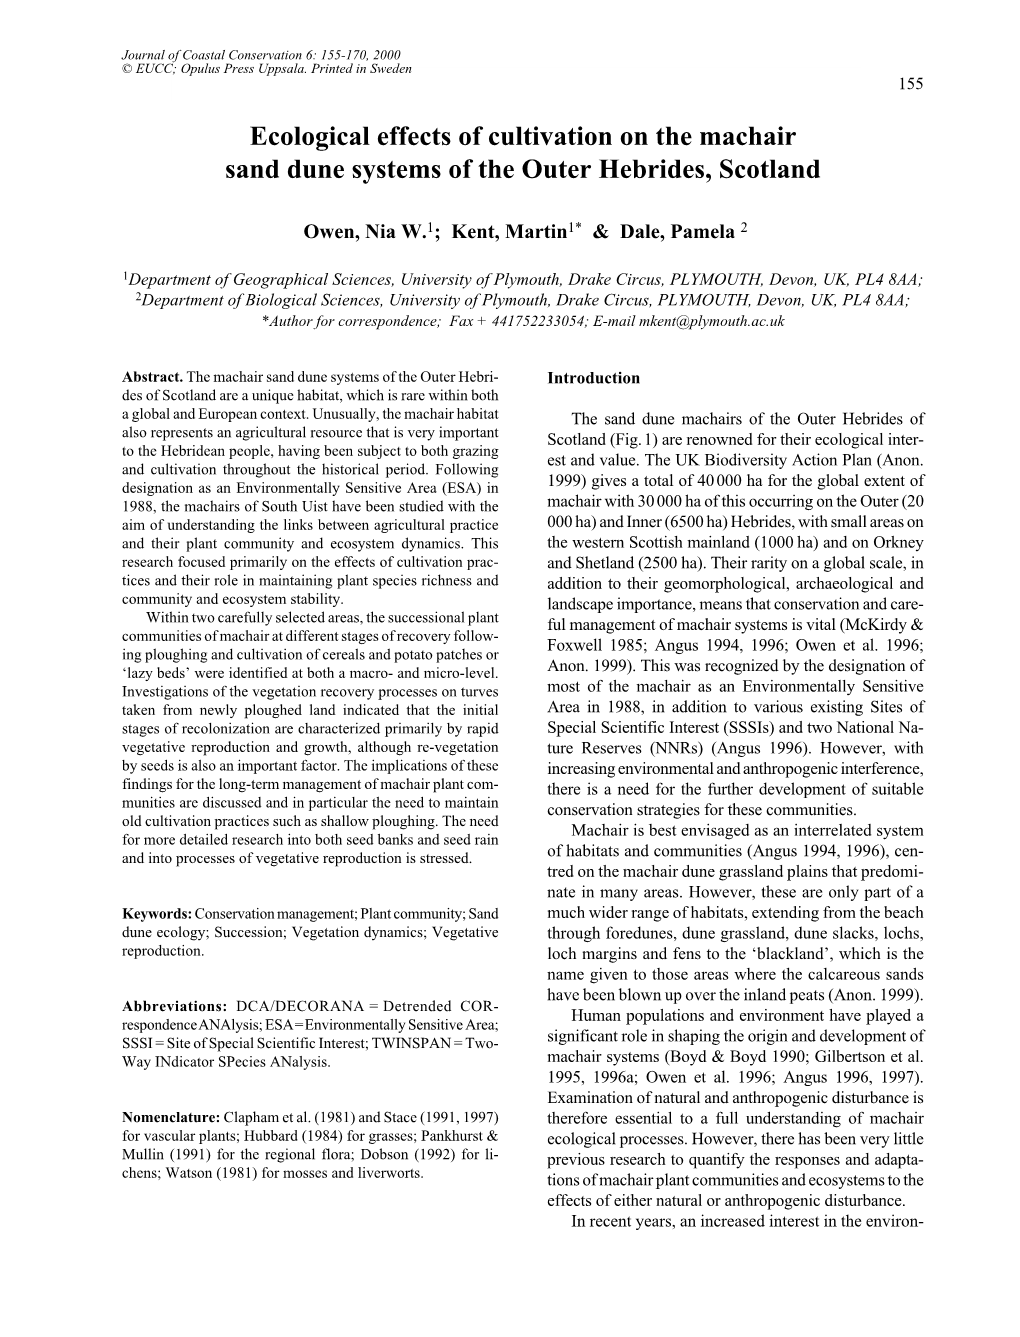 Ecological Effects of Cultivation on the Machair Sand Dune Systems of the Outer Hebrides - 155